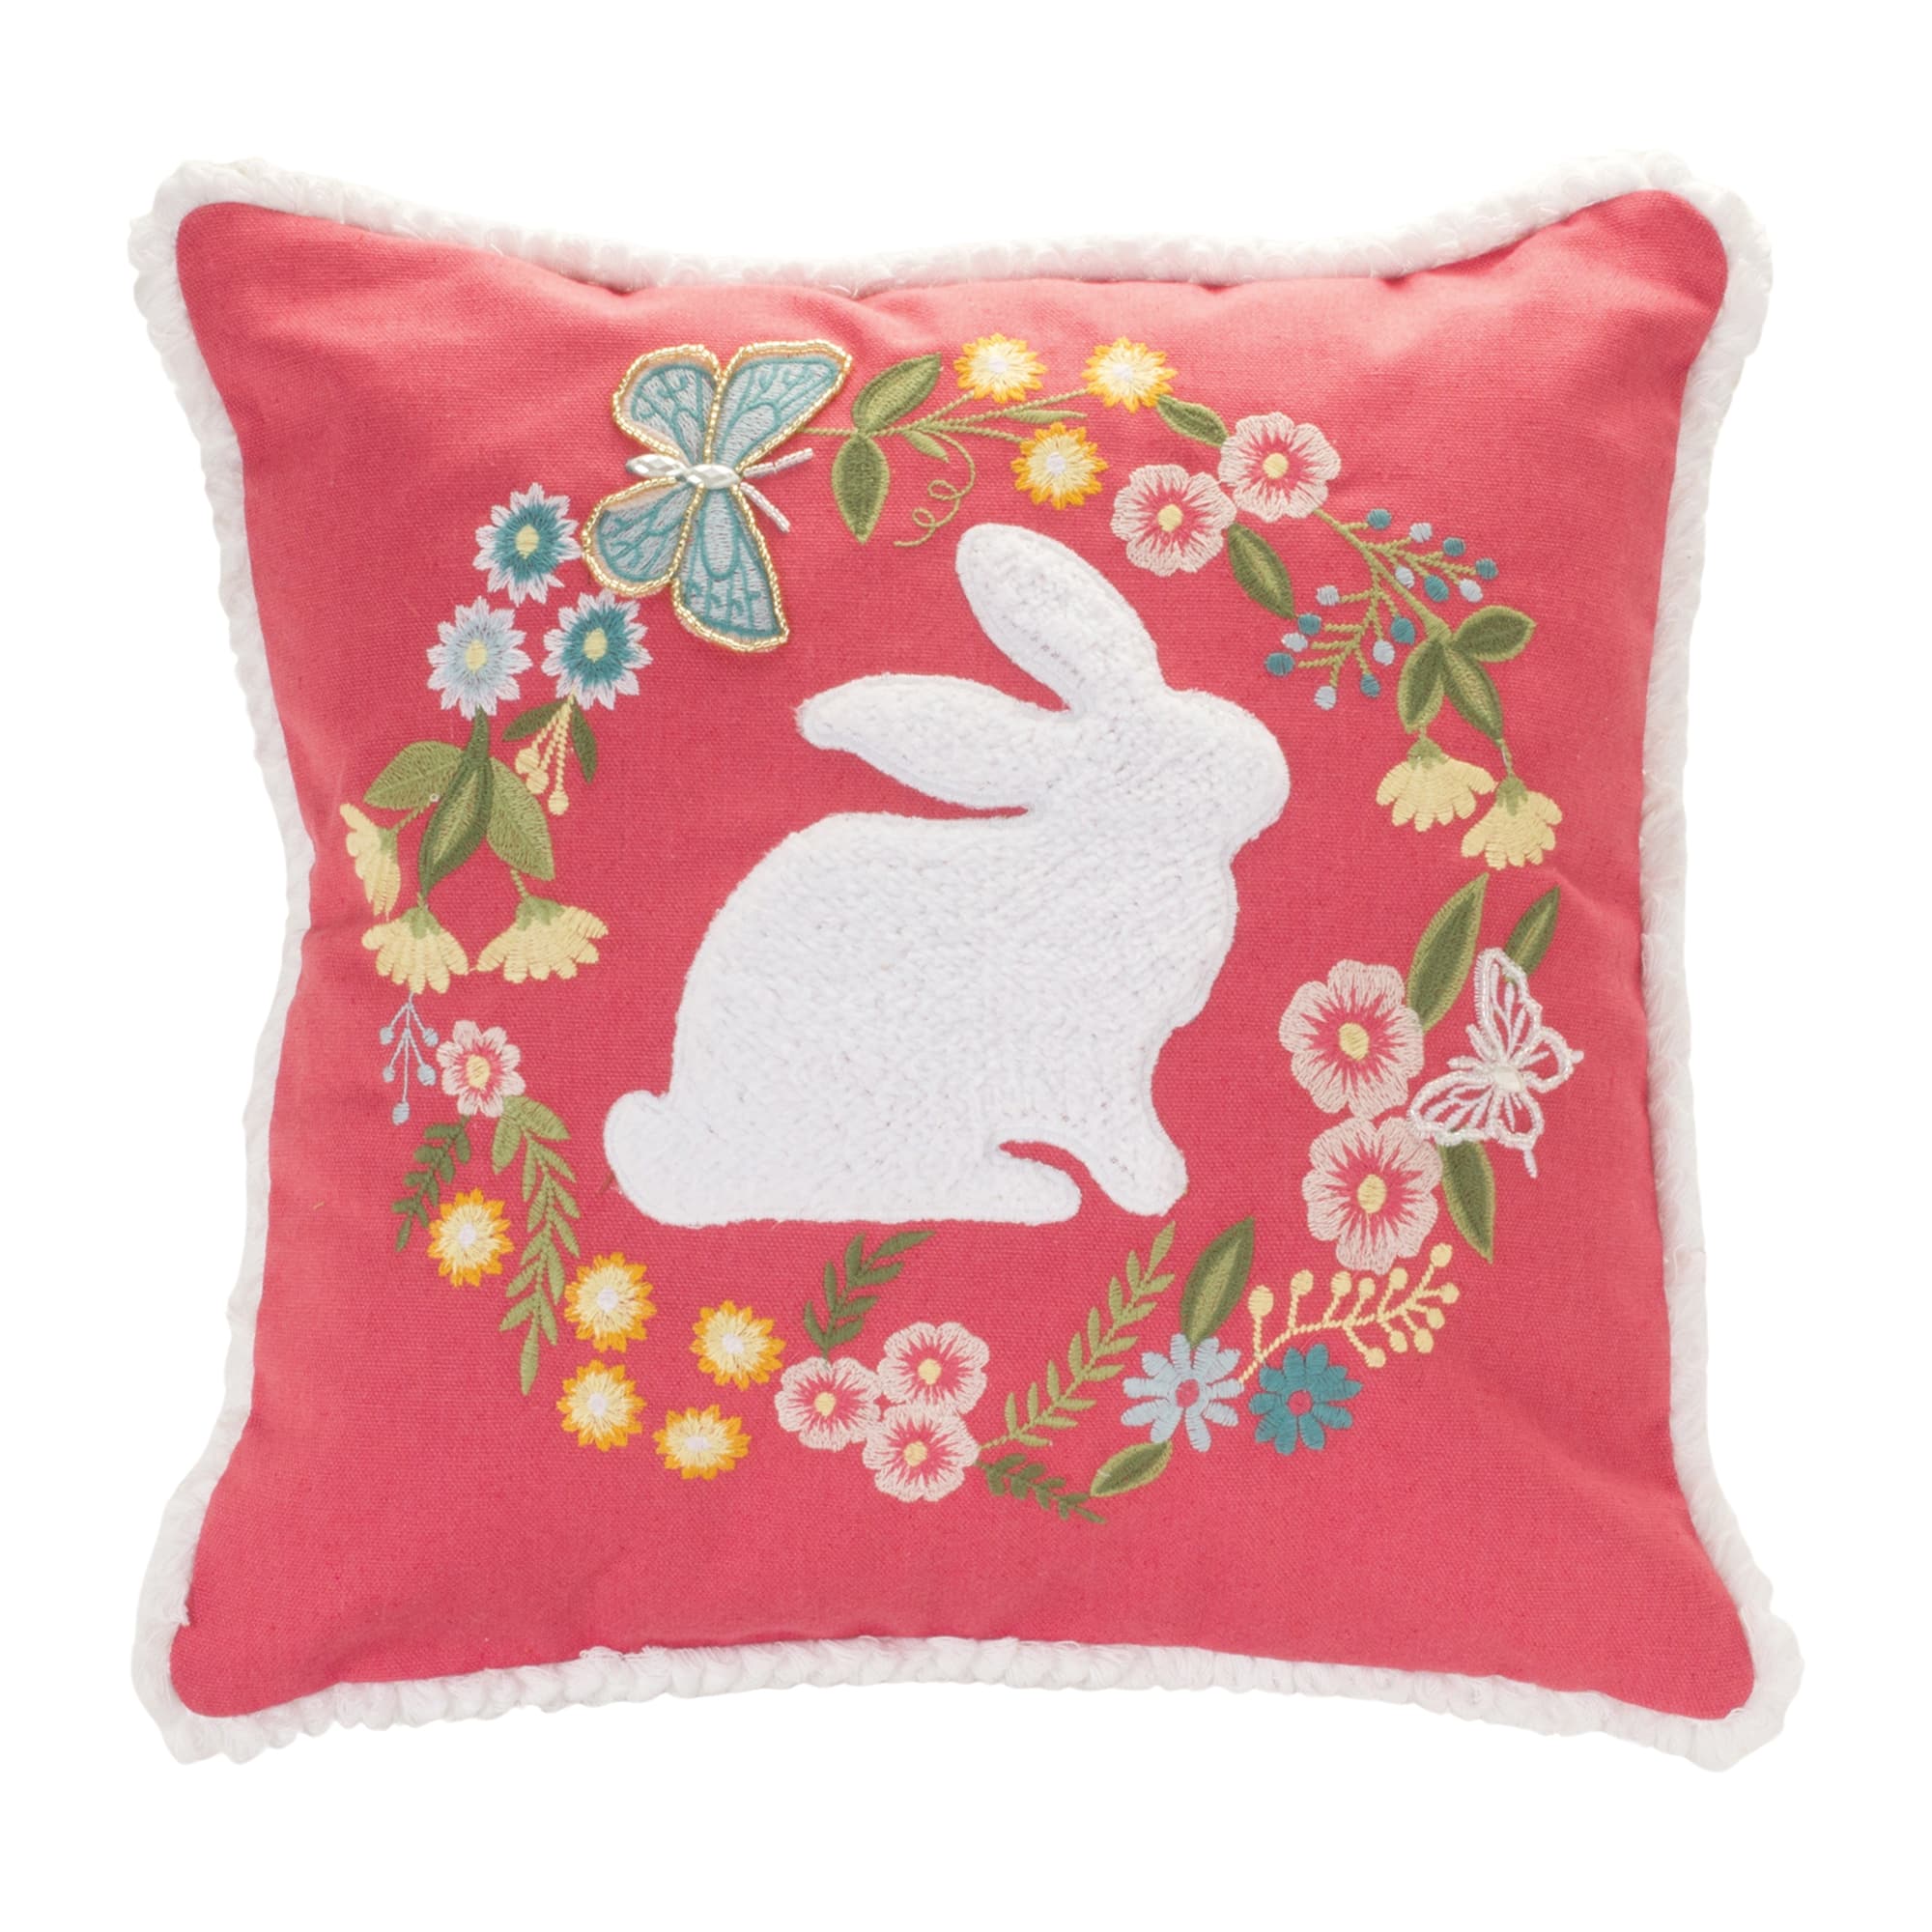 Pink &#x26; White Floral Rabbit Embroidered Decorative Pillow